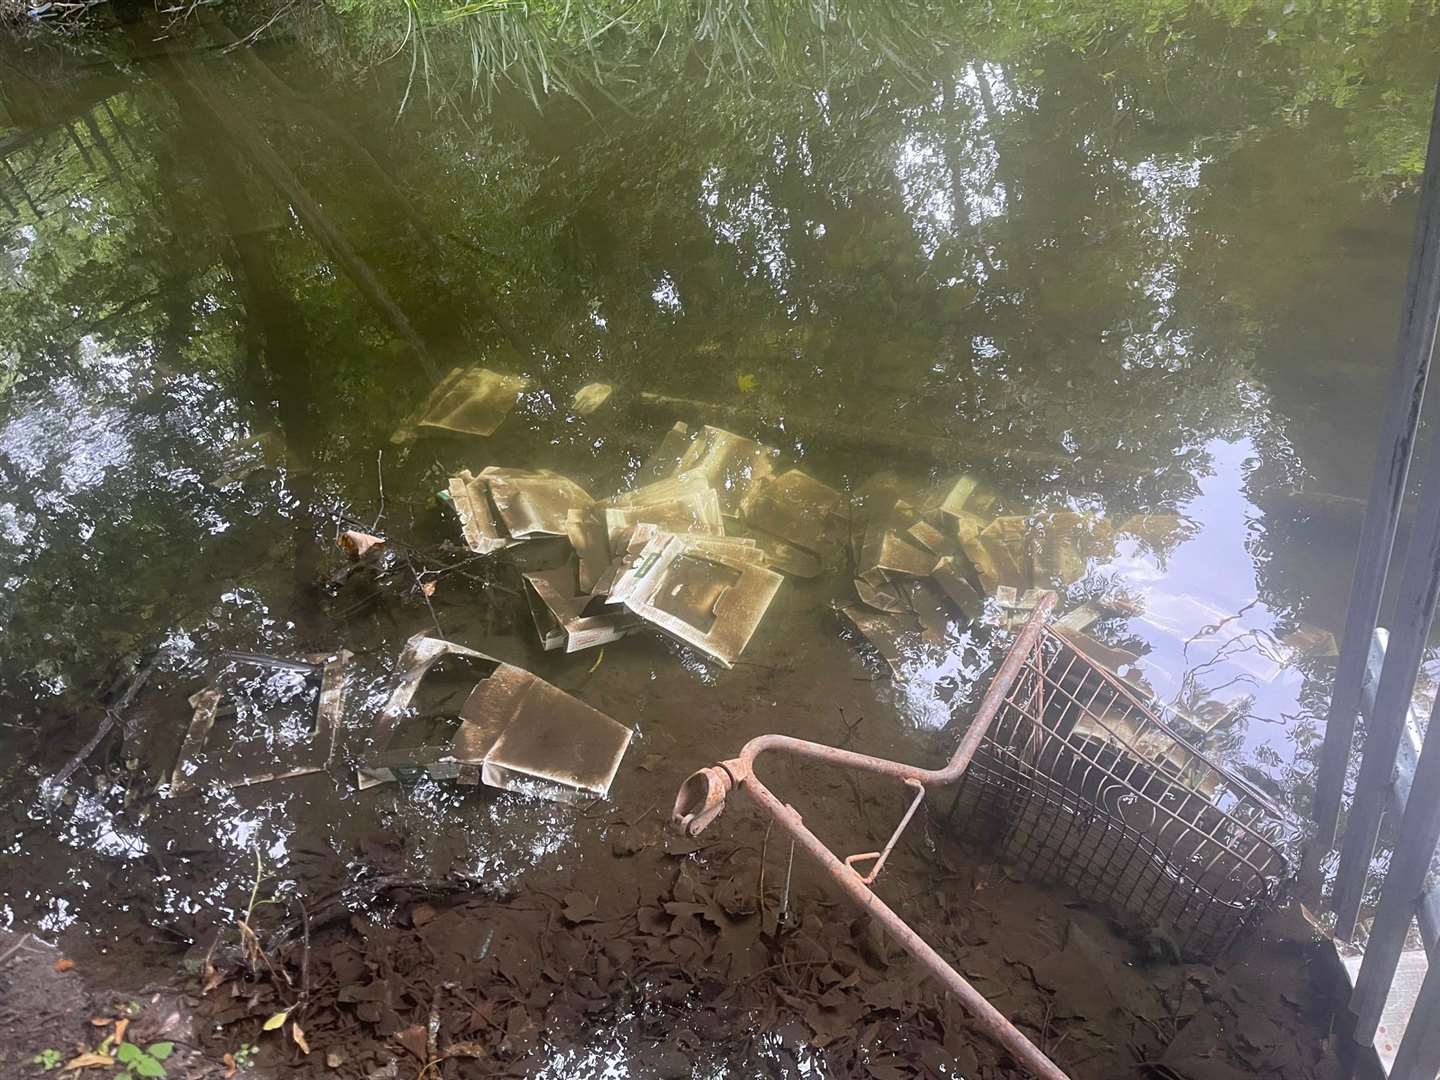 Krispy Kreme packing was found dumped in the River Darent. Picture: Chris P Bacon